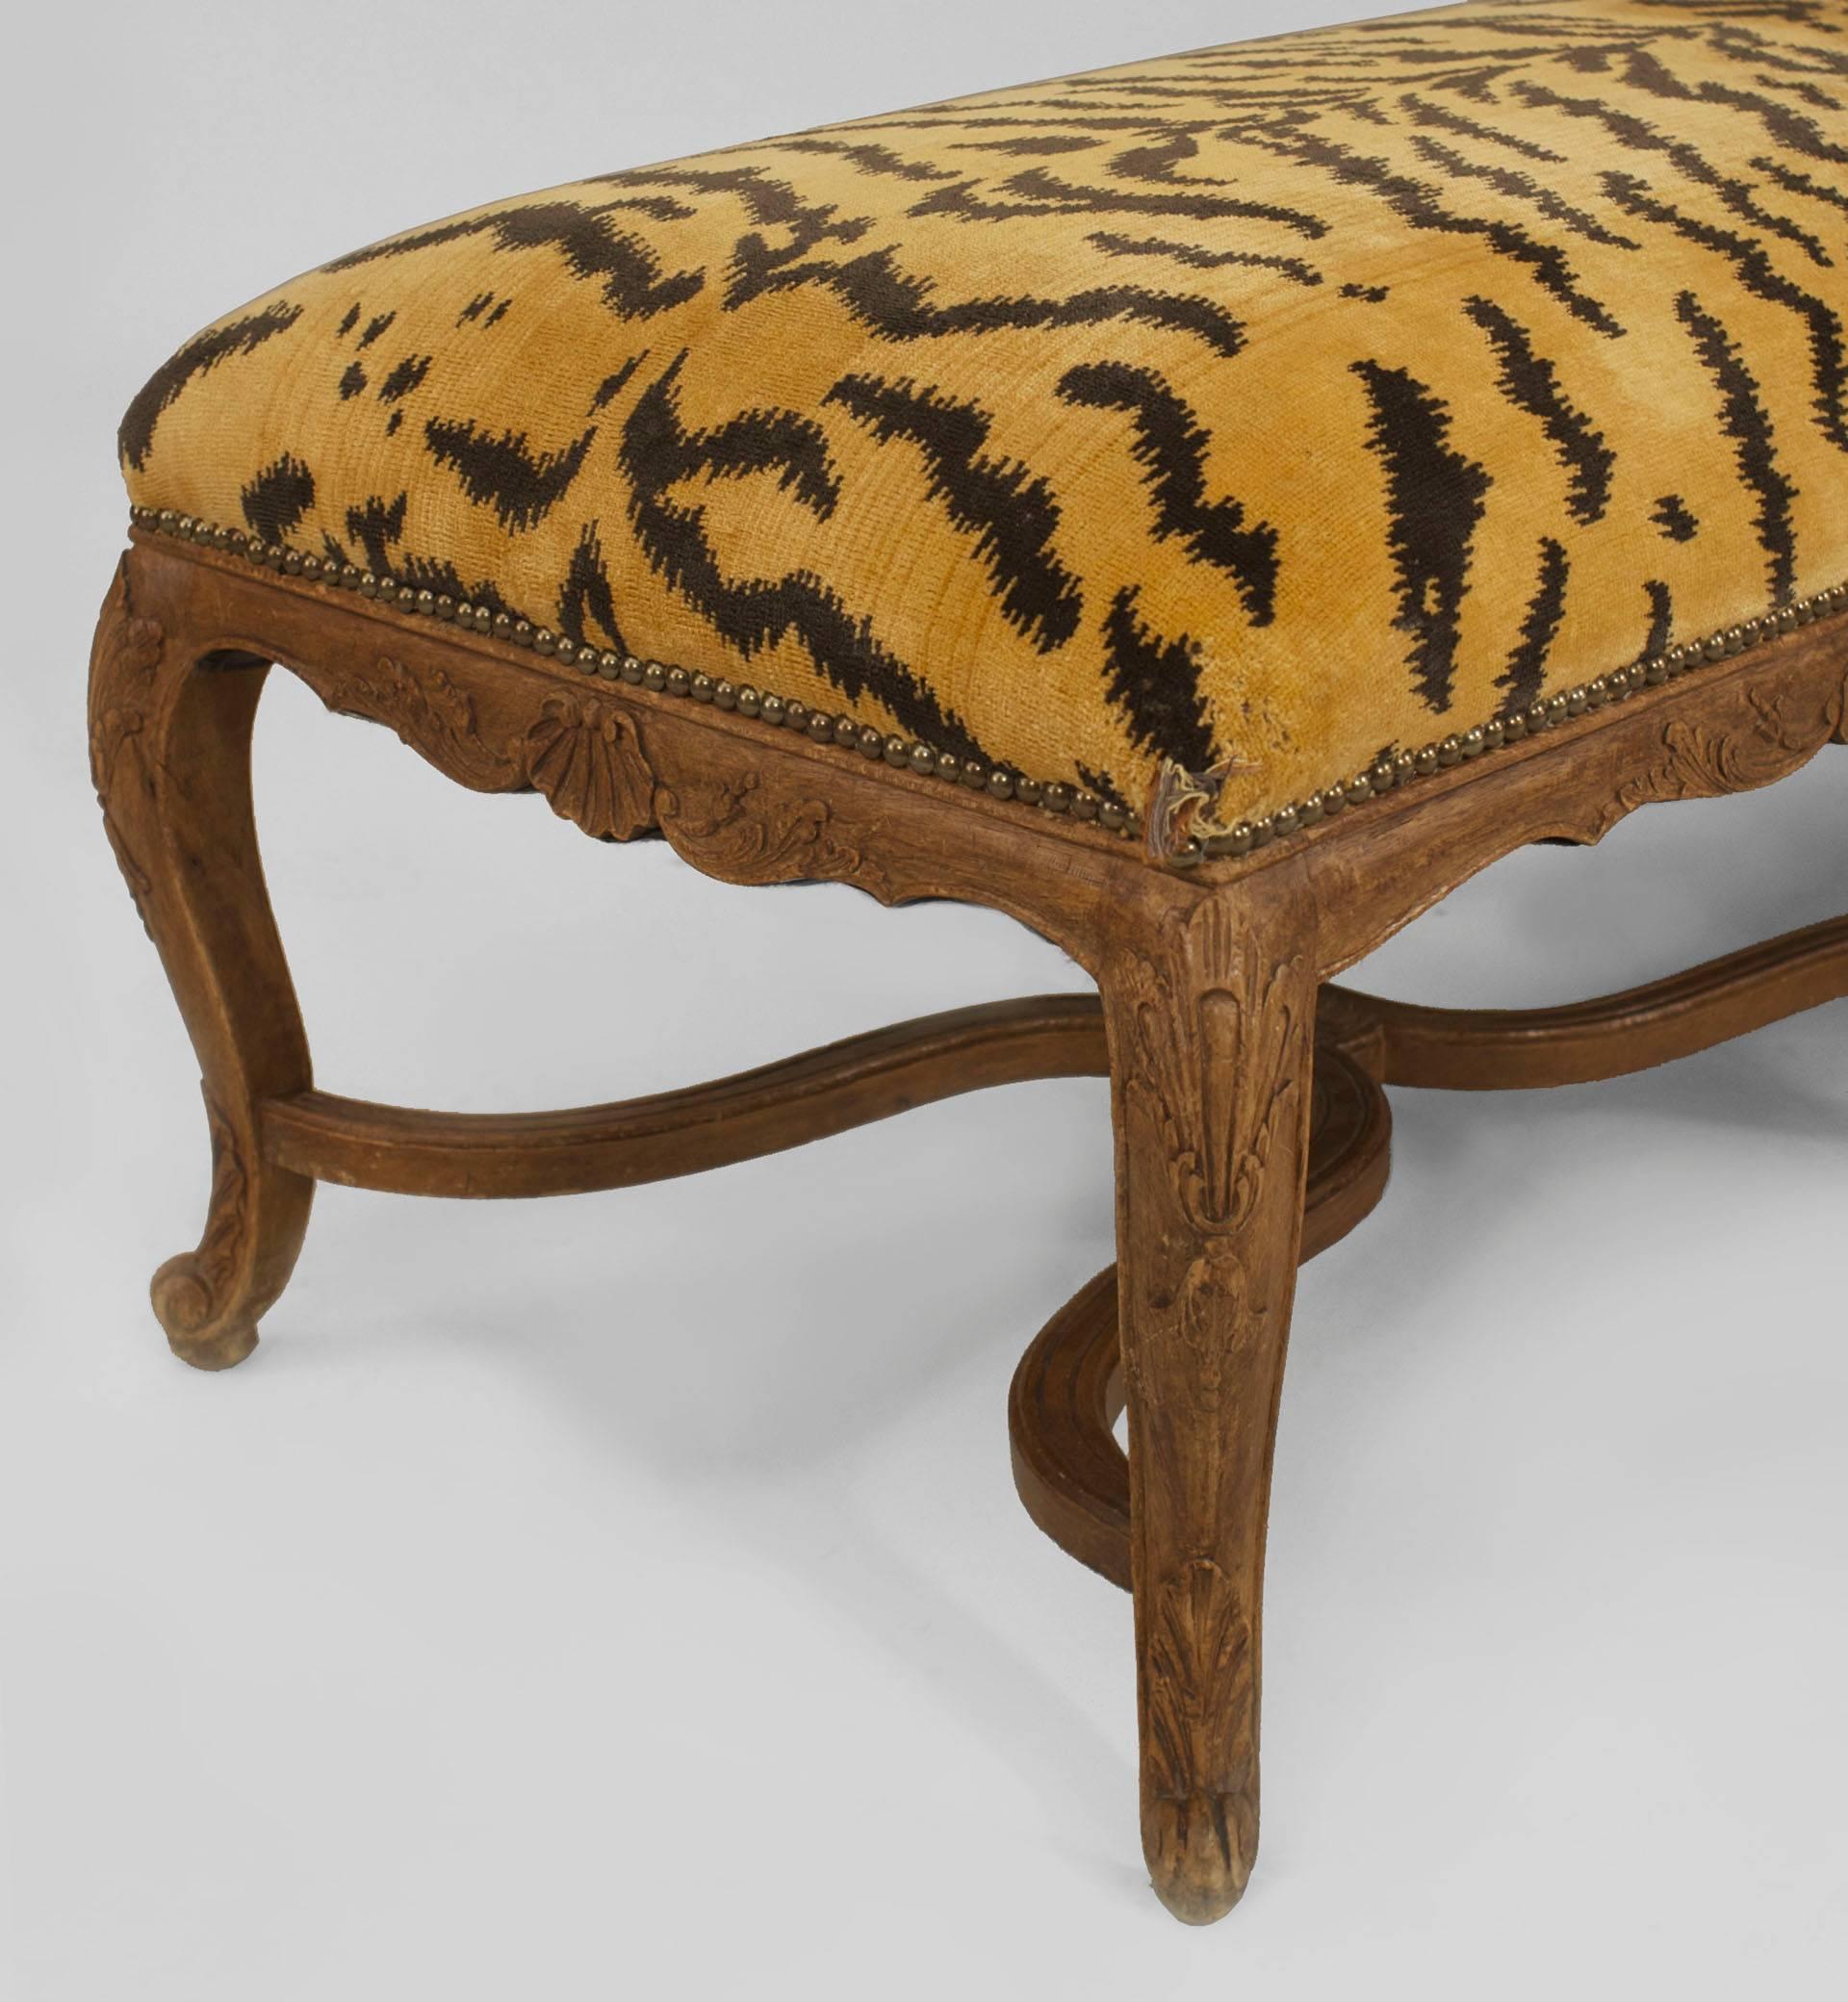 French Regence style (19/20th Century) walnut long 8 leg bench with a stretcher and a faux tiger upholstered seat
